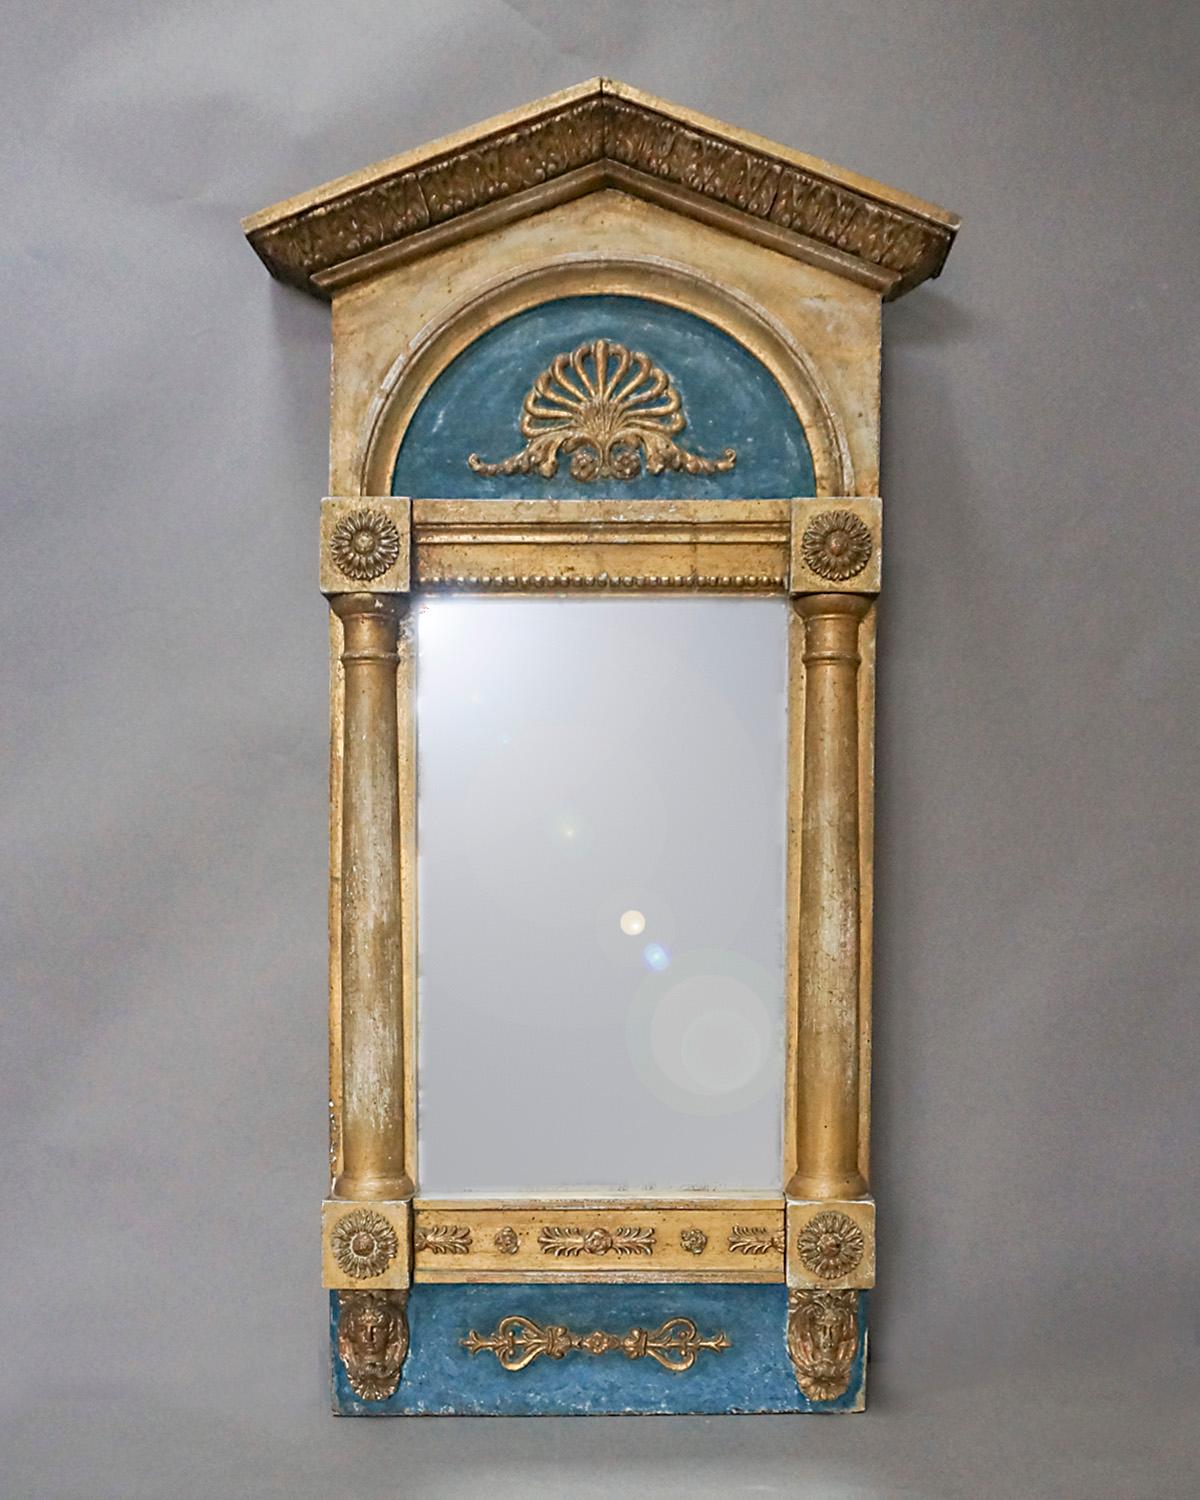 Neoclassical mirror, Sweden circa 1830, with half-columns on either side and a peaked cornice. Above and below the mirror glass are panels with gilded details against a blue background. The sunflower appliques at the corners and the Egyptian heads